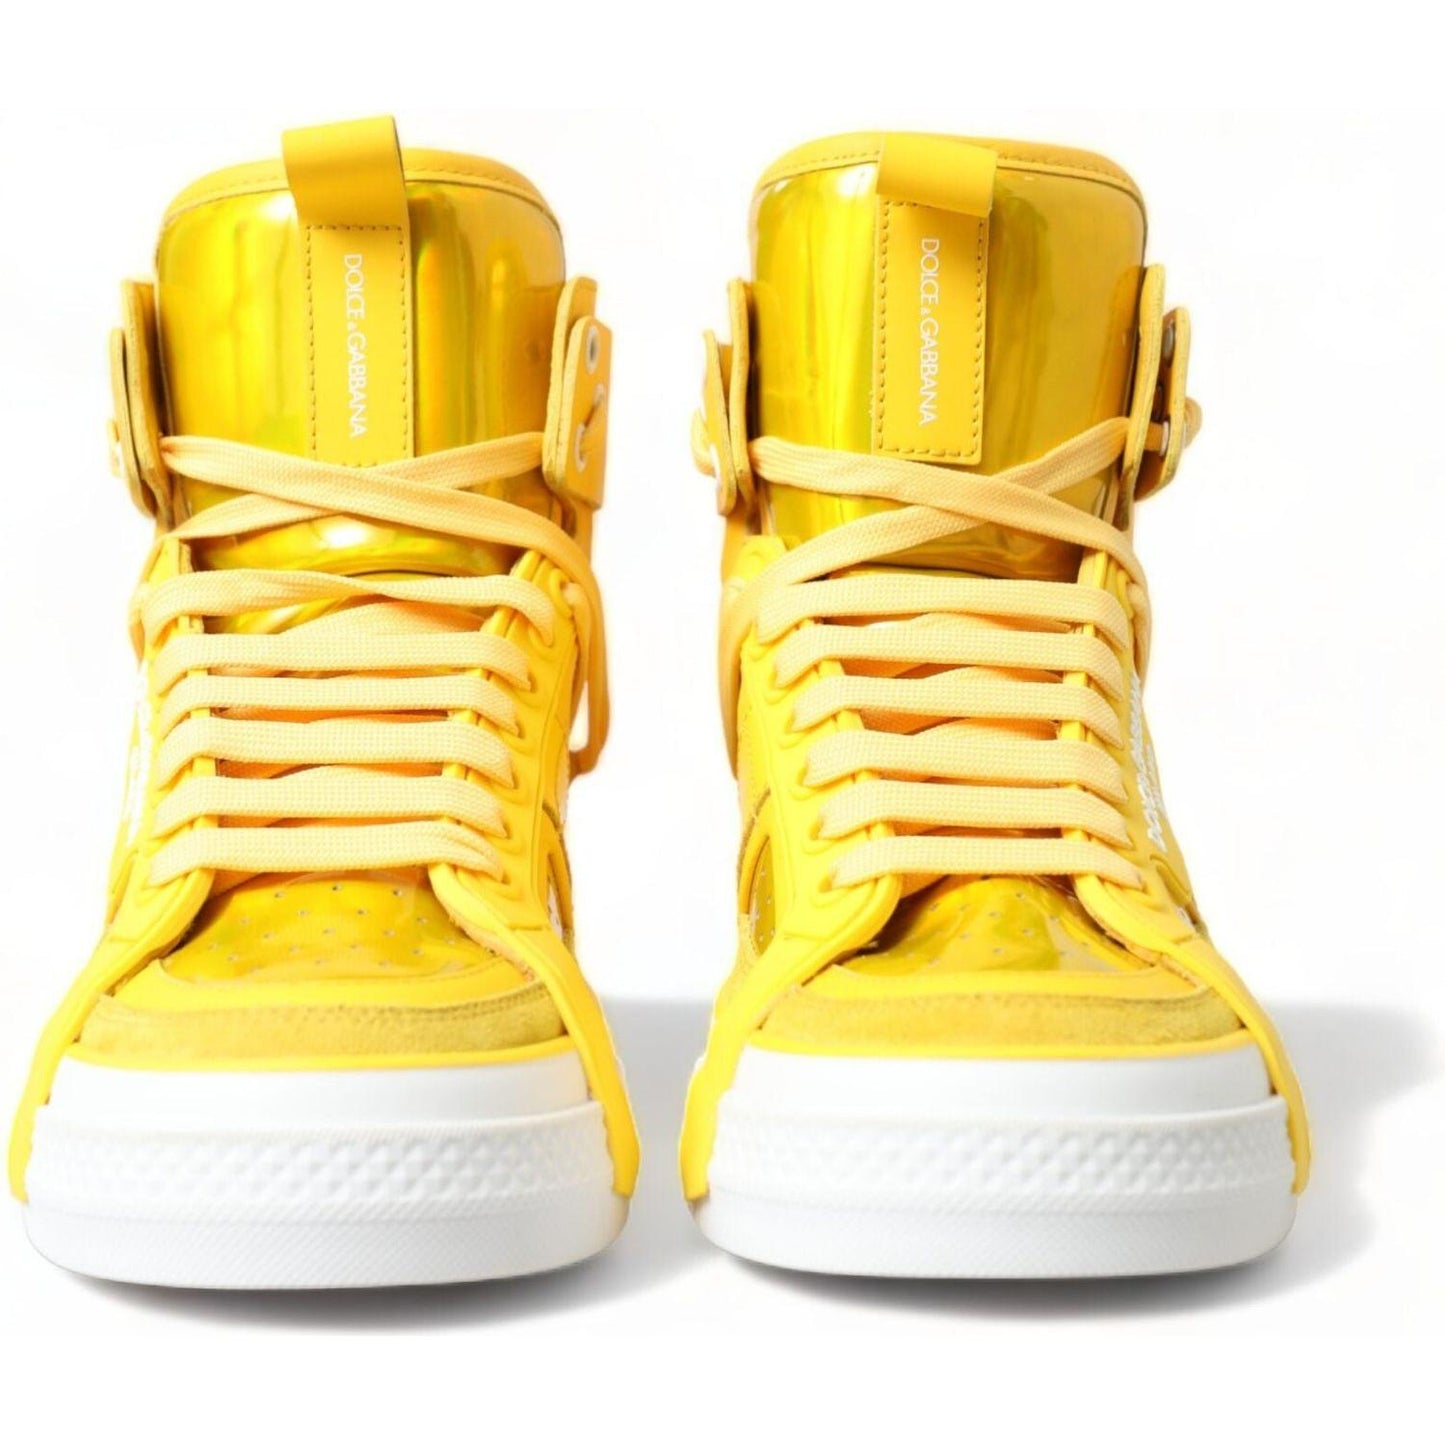 Dolce & Gabbana Chic High-Top Color-Block Sneakers yellow-white-leather-high-top-sneakers-shoes 465A2105-BG-scaled-c319abe4-836.jpg